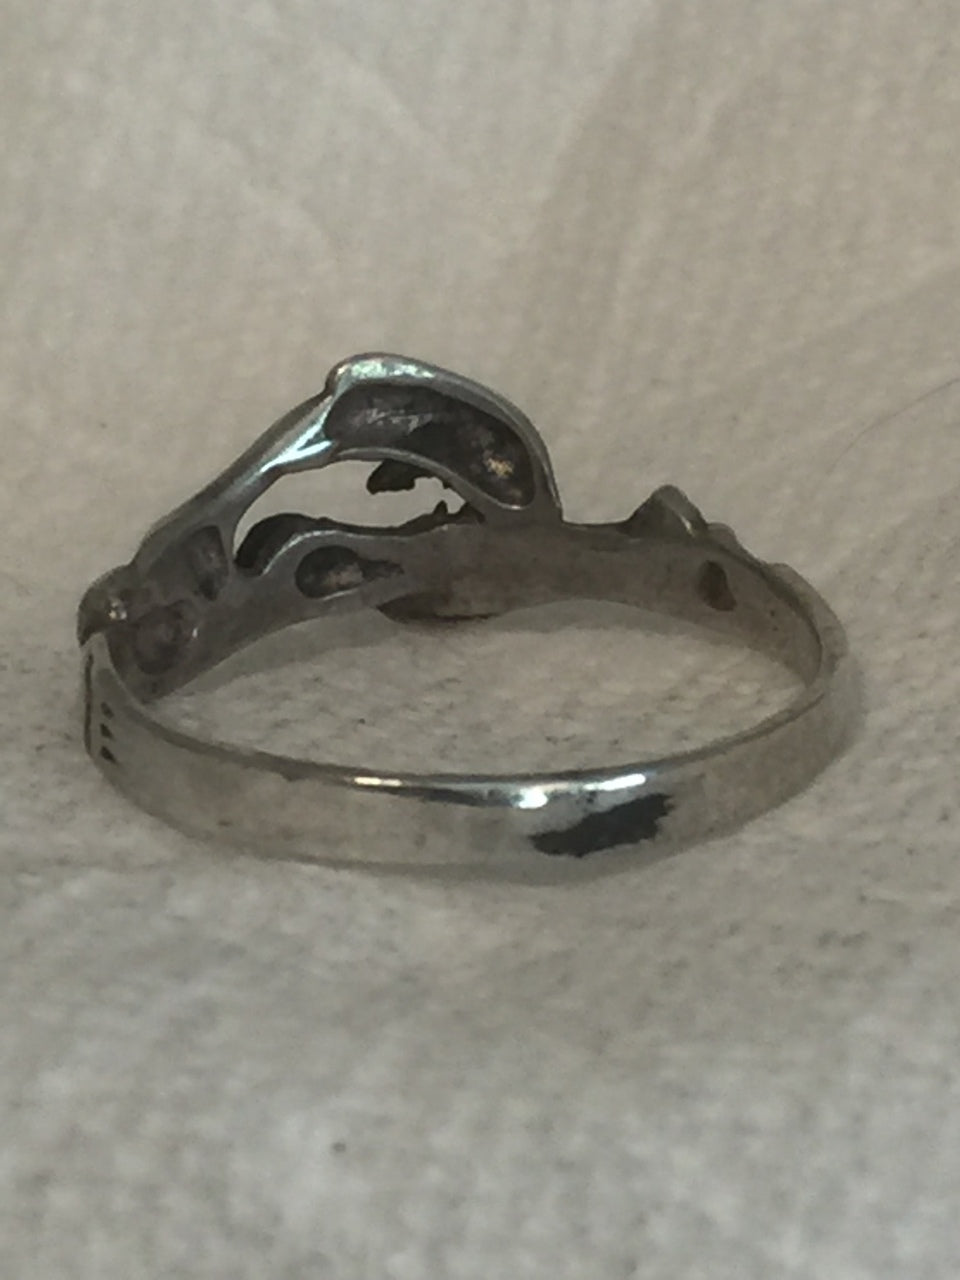 Vintage Sterling Silver Dolphin Ring with Waves  Handmade   Size  9   2g